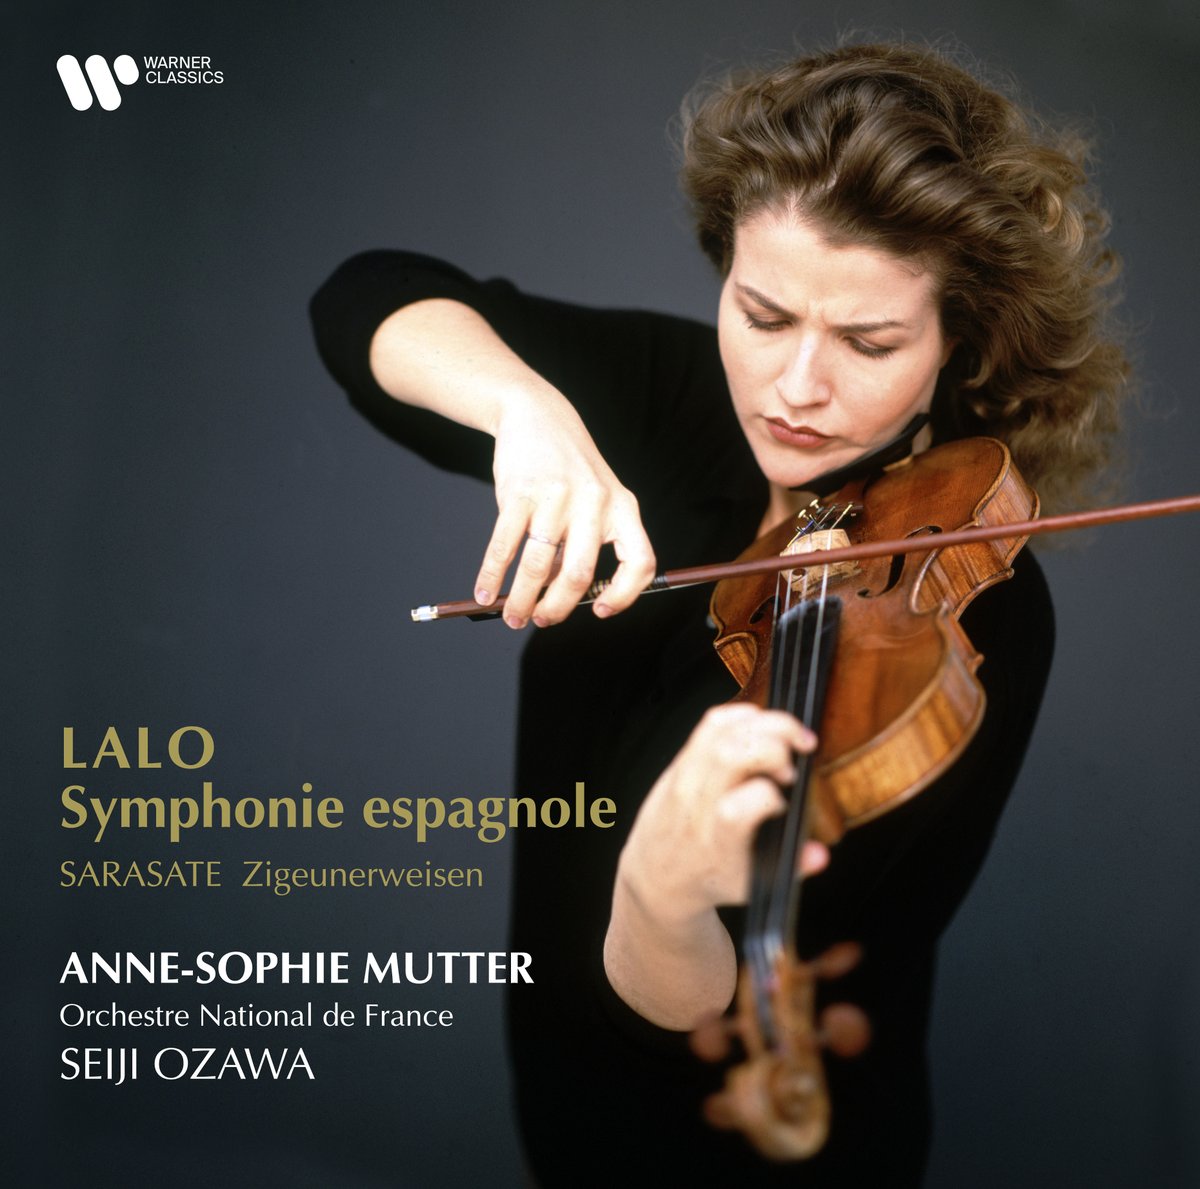 OUT NOW on LP: Anne-Sophie Mutter’s recording of Lalo’s Symphonie espagnole, captured early on in the violinist’s career just before turning 21 years old, with legendary Japanese conductor Seiji Ozawa and Orchestre National de France. #classicalmusic #vinyl